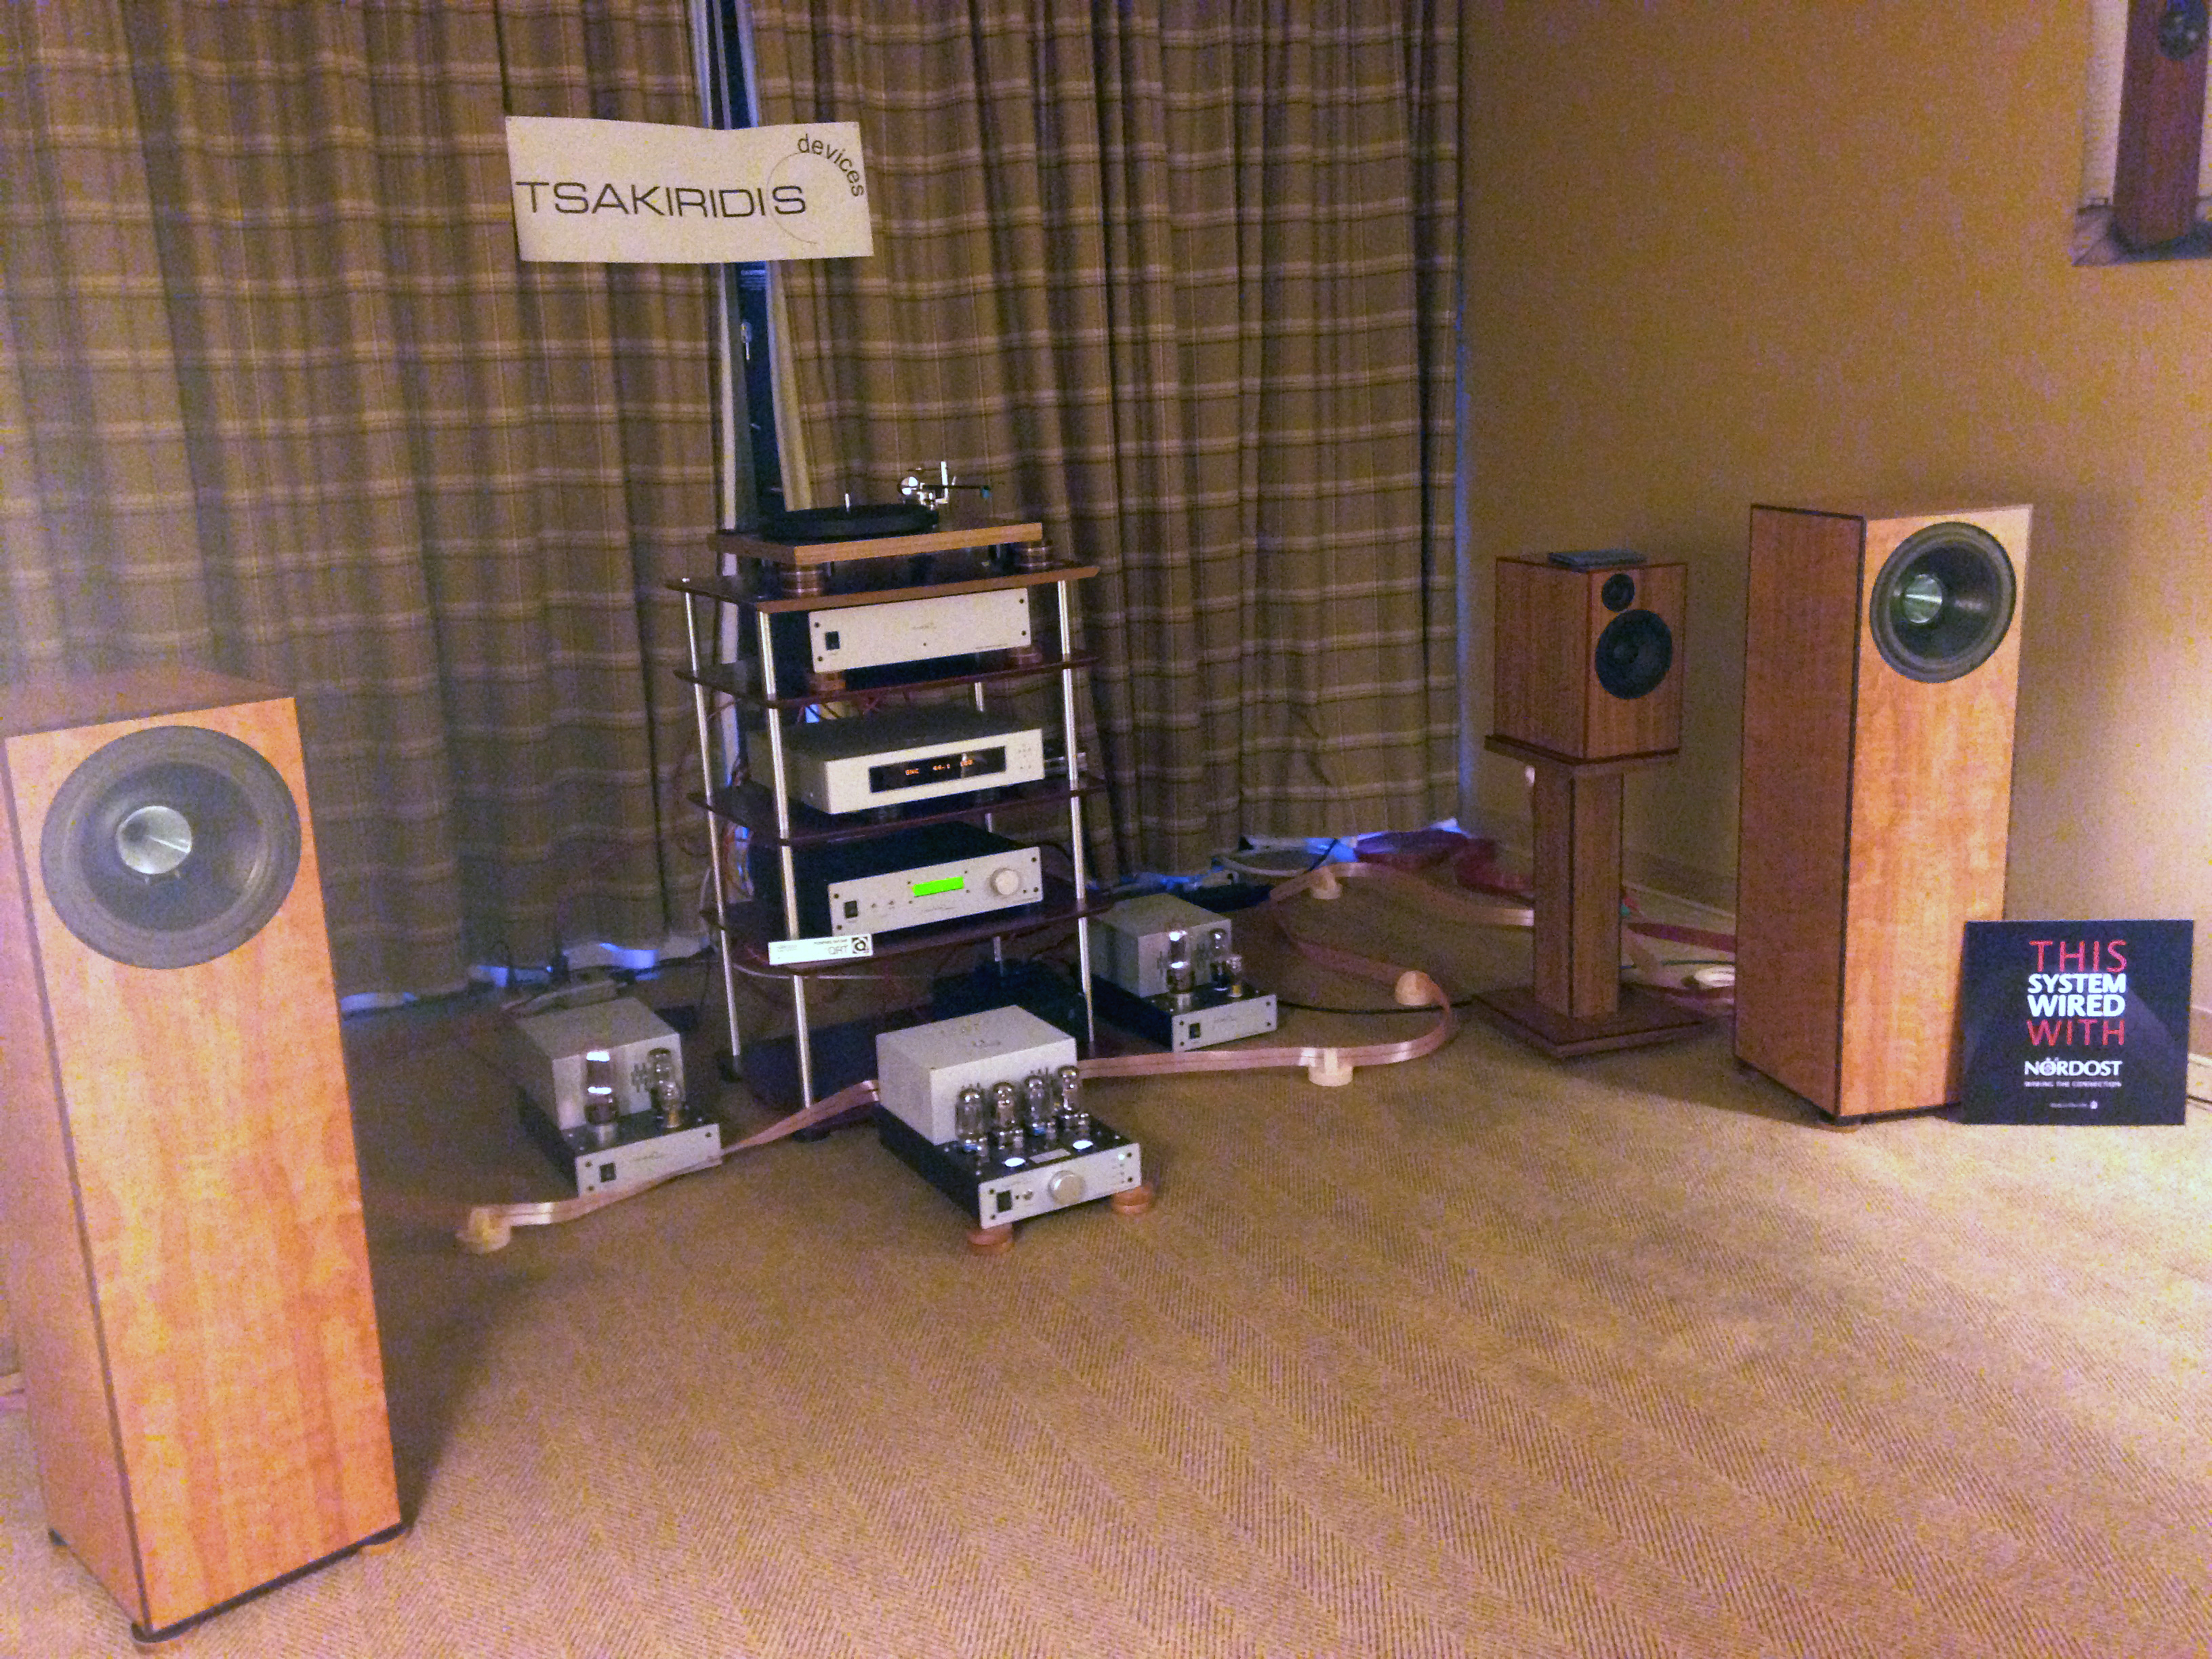 Long-time Nordost supporters, Coherent Audio, were wired with Heimdall 2 and power purified by QRT.  Even the speakers had Nordost internal wiring!